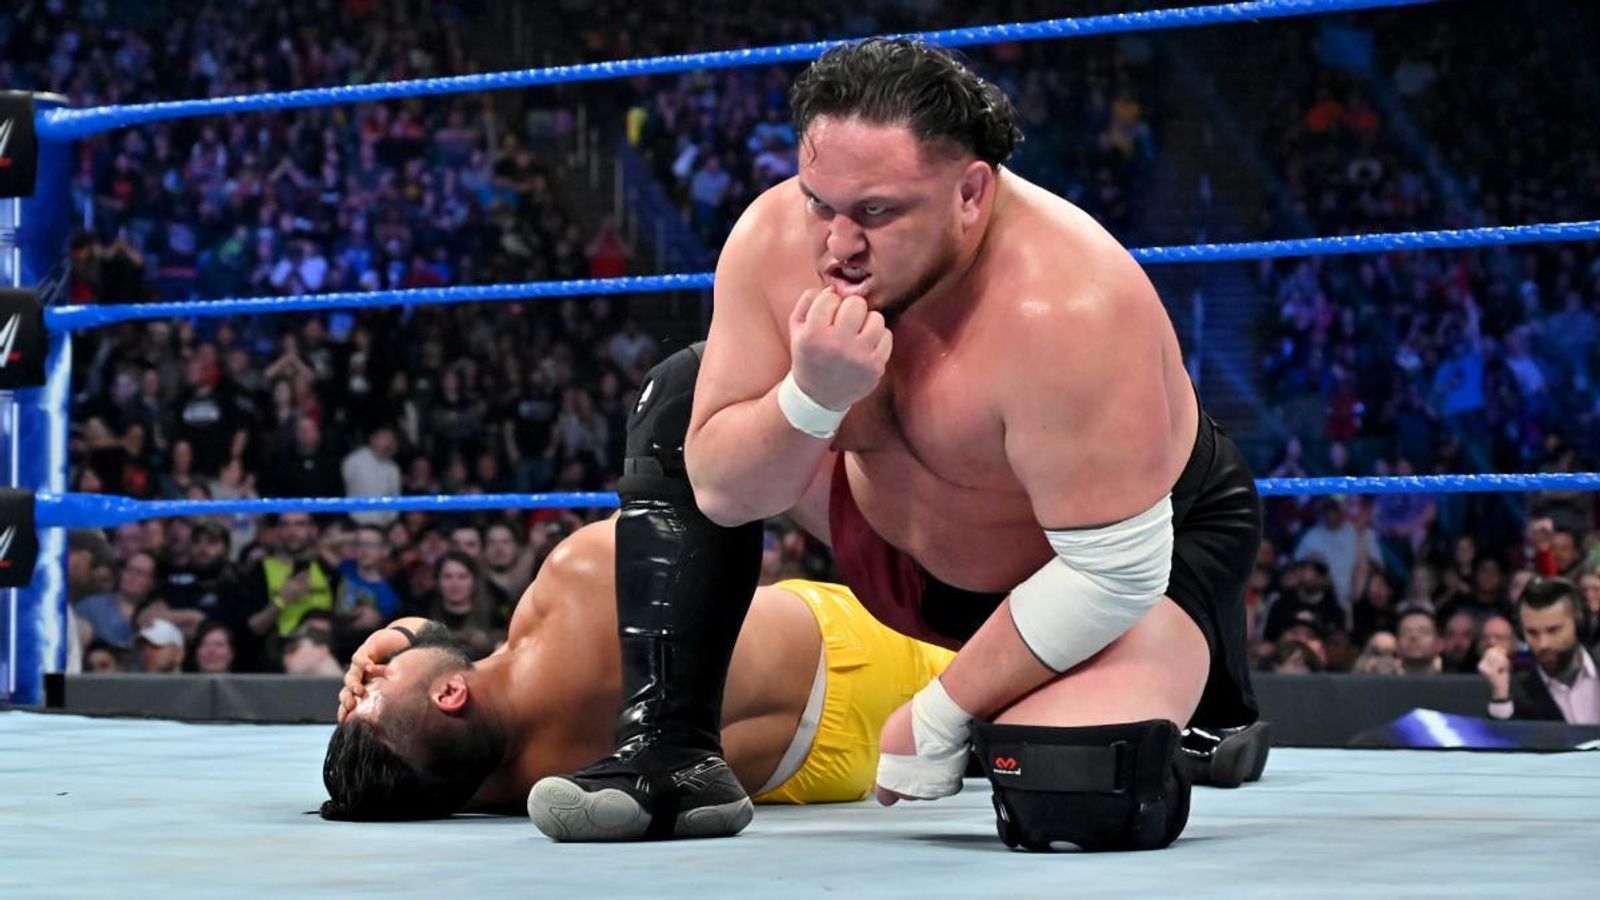 WATCH WWE SmackDown highlights the best of the action from this week